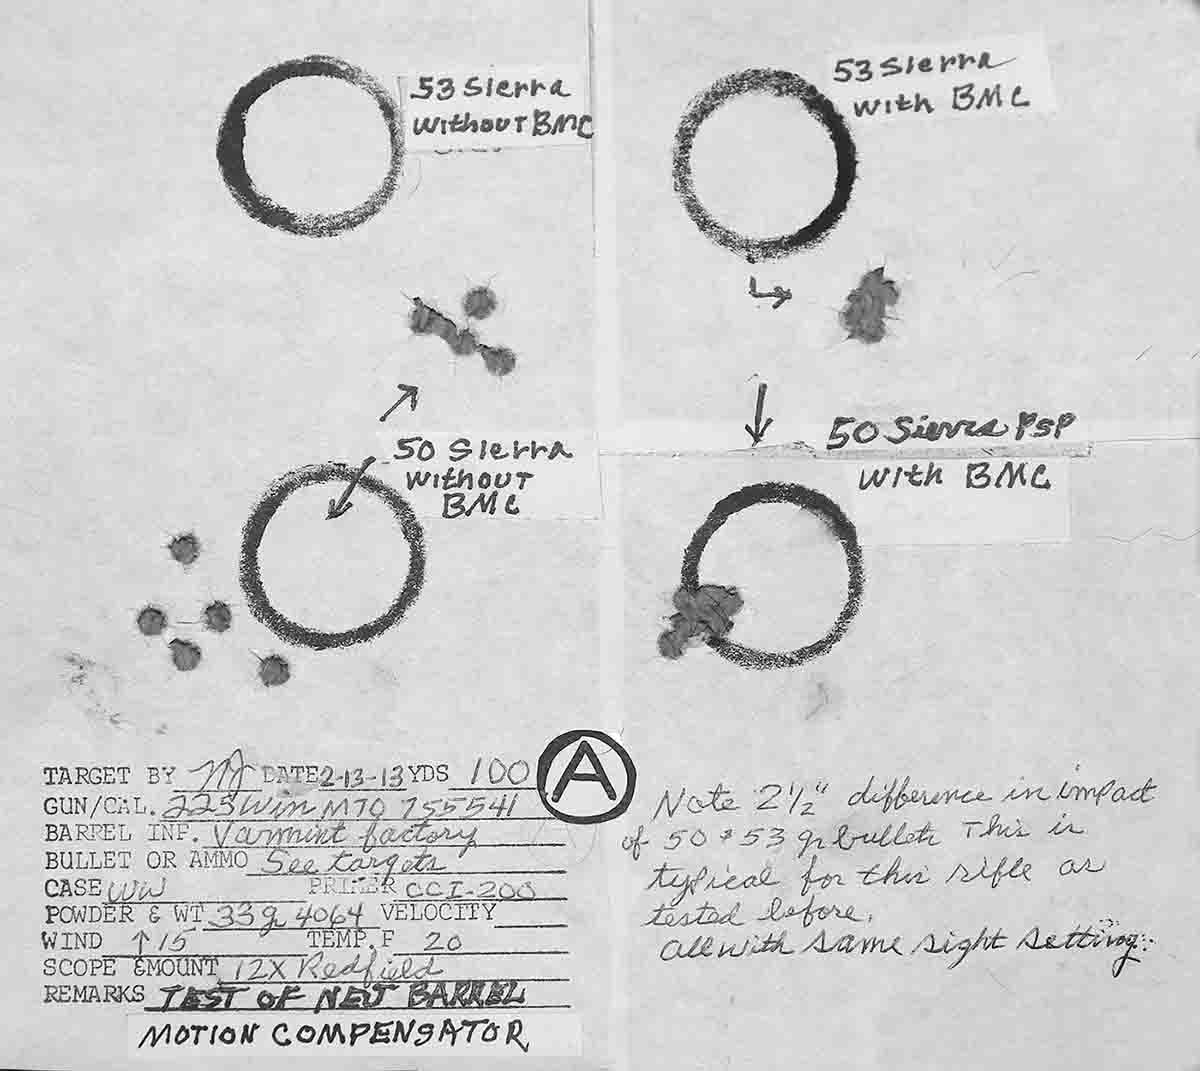 Target A was made without (left) and with (right) the use of the barrel motion compensator attached to a Model 70 .225 Winchester with a varmint-weight barrel. Accuracy was improved with 53- and 50-grain bullets.